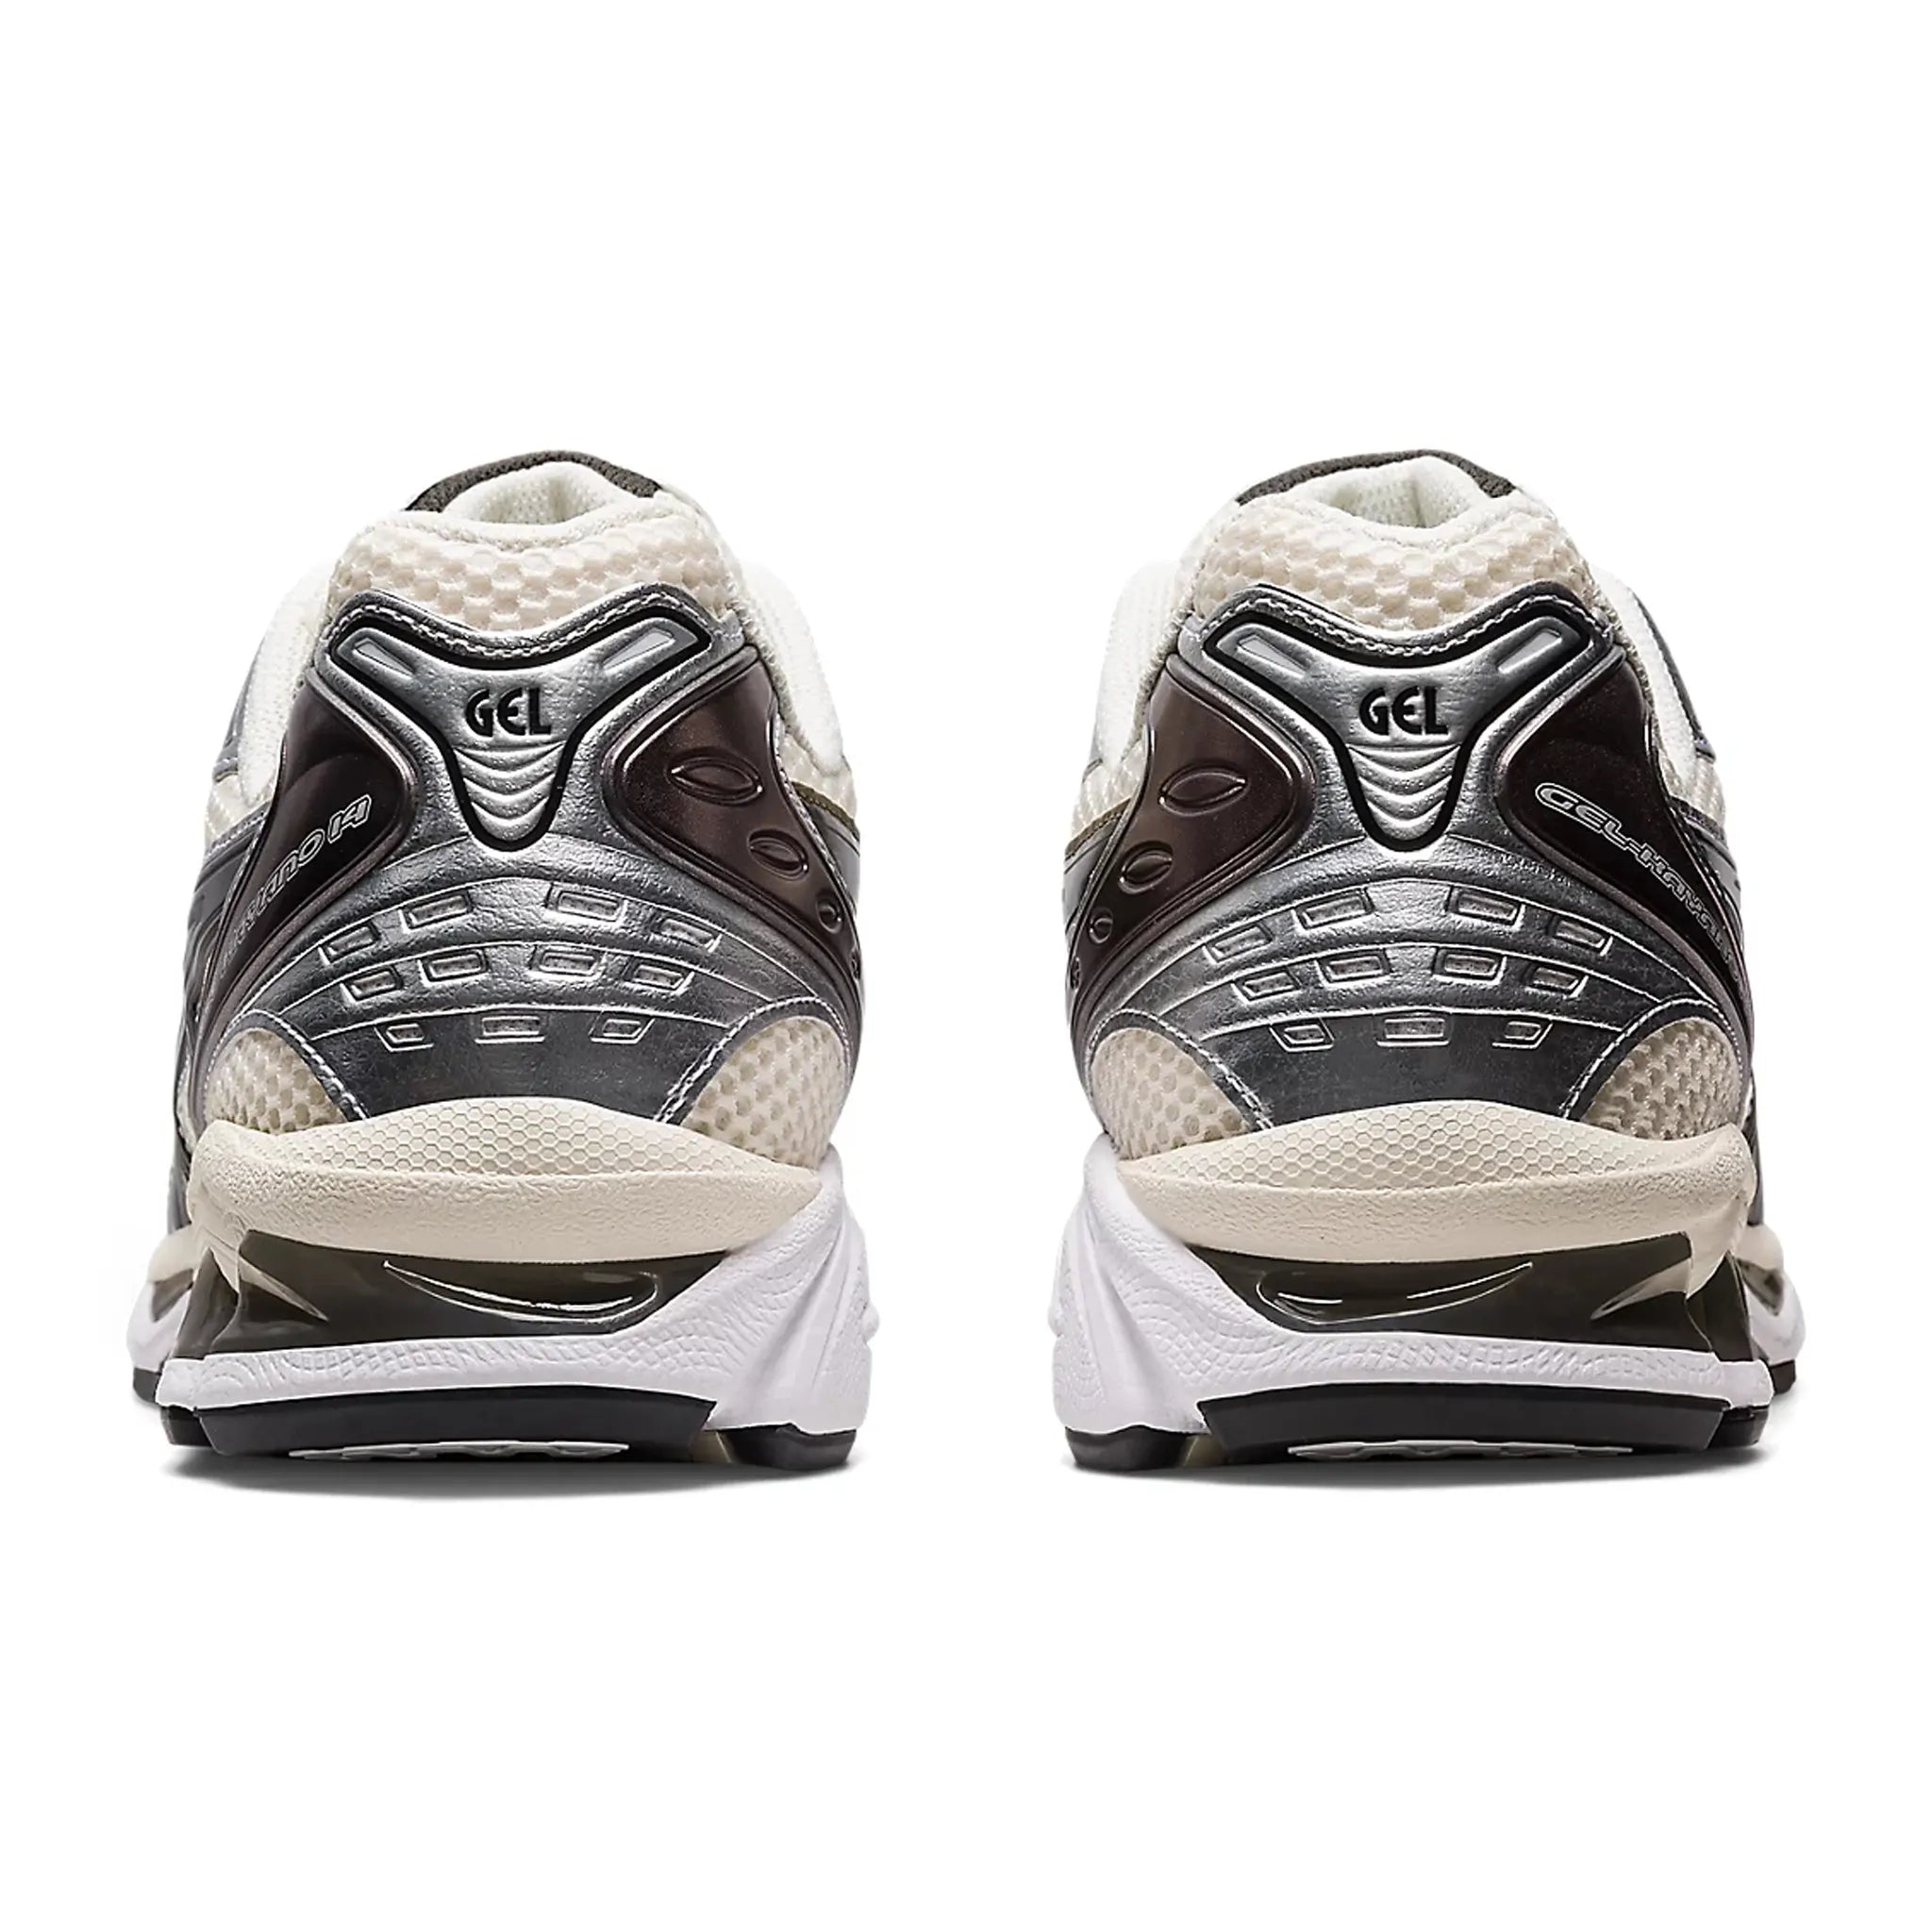 Back view of Asics Gel-Kayano 14 Silver Cream Black (W) 1201A019-108